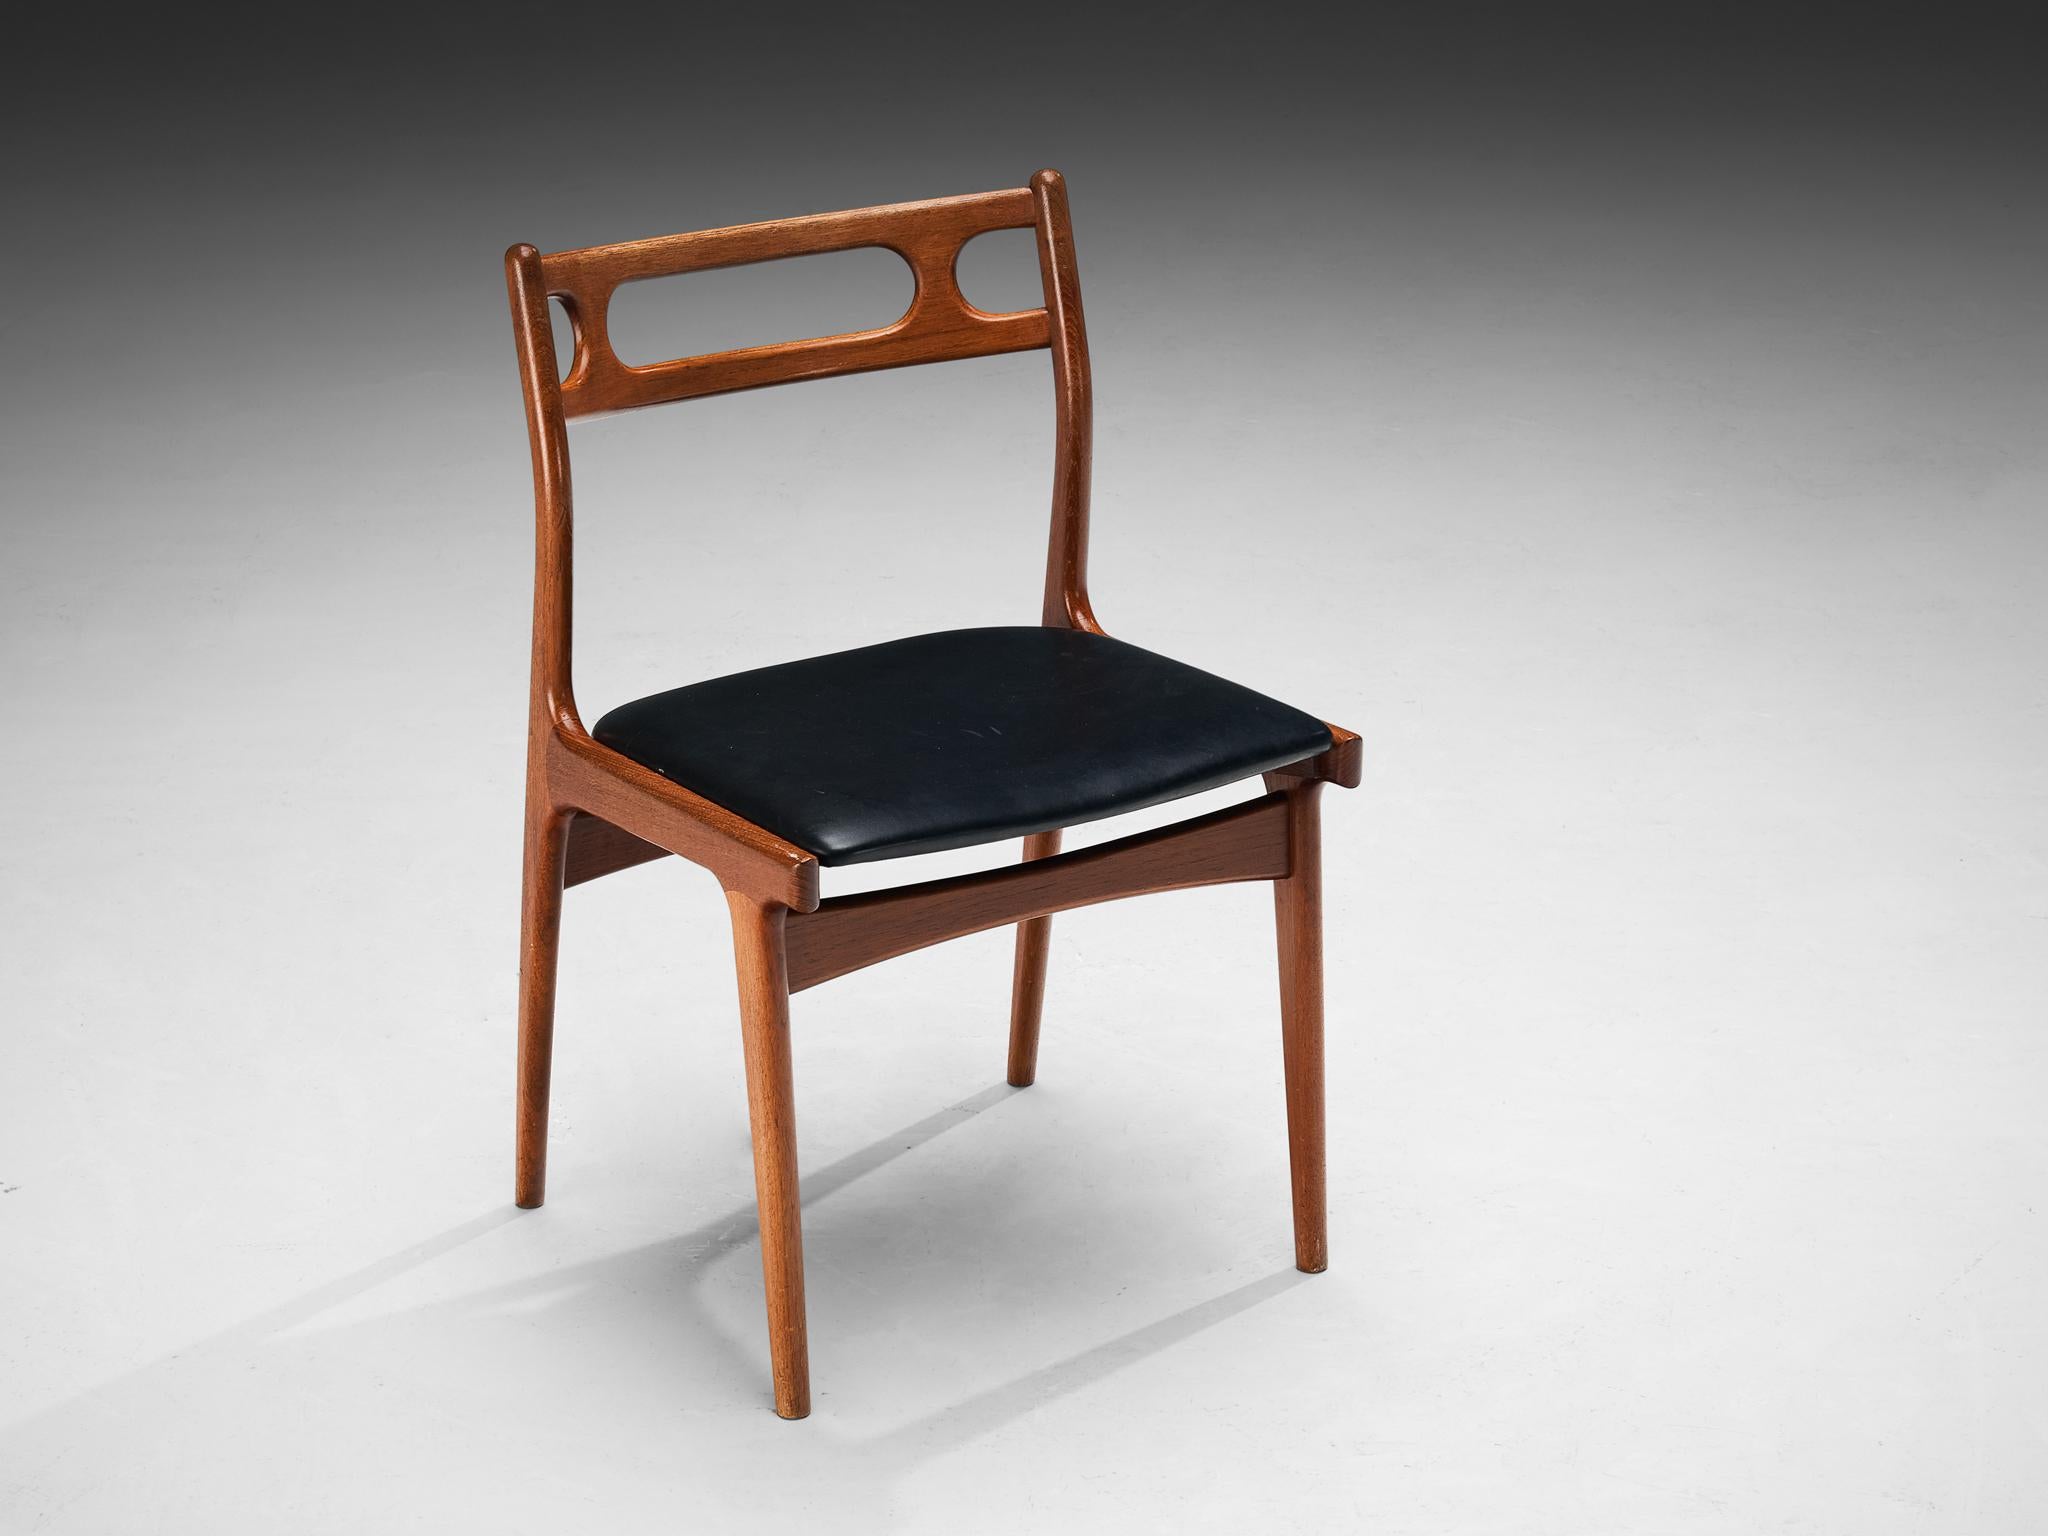 Johannes Andersen for Uldum Møbelfabrik, dining chair, model '138', teak, faux leather, Denmark, 1960s

An elegant dining chair created by the Danish designer Johannes Andersen and produced by Uldum Møbelfrabrik in Denmark. The design is defined by